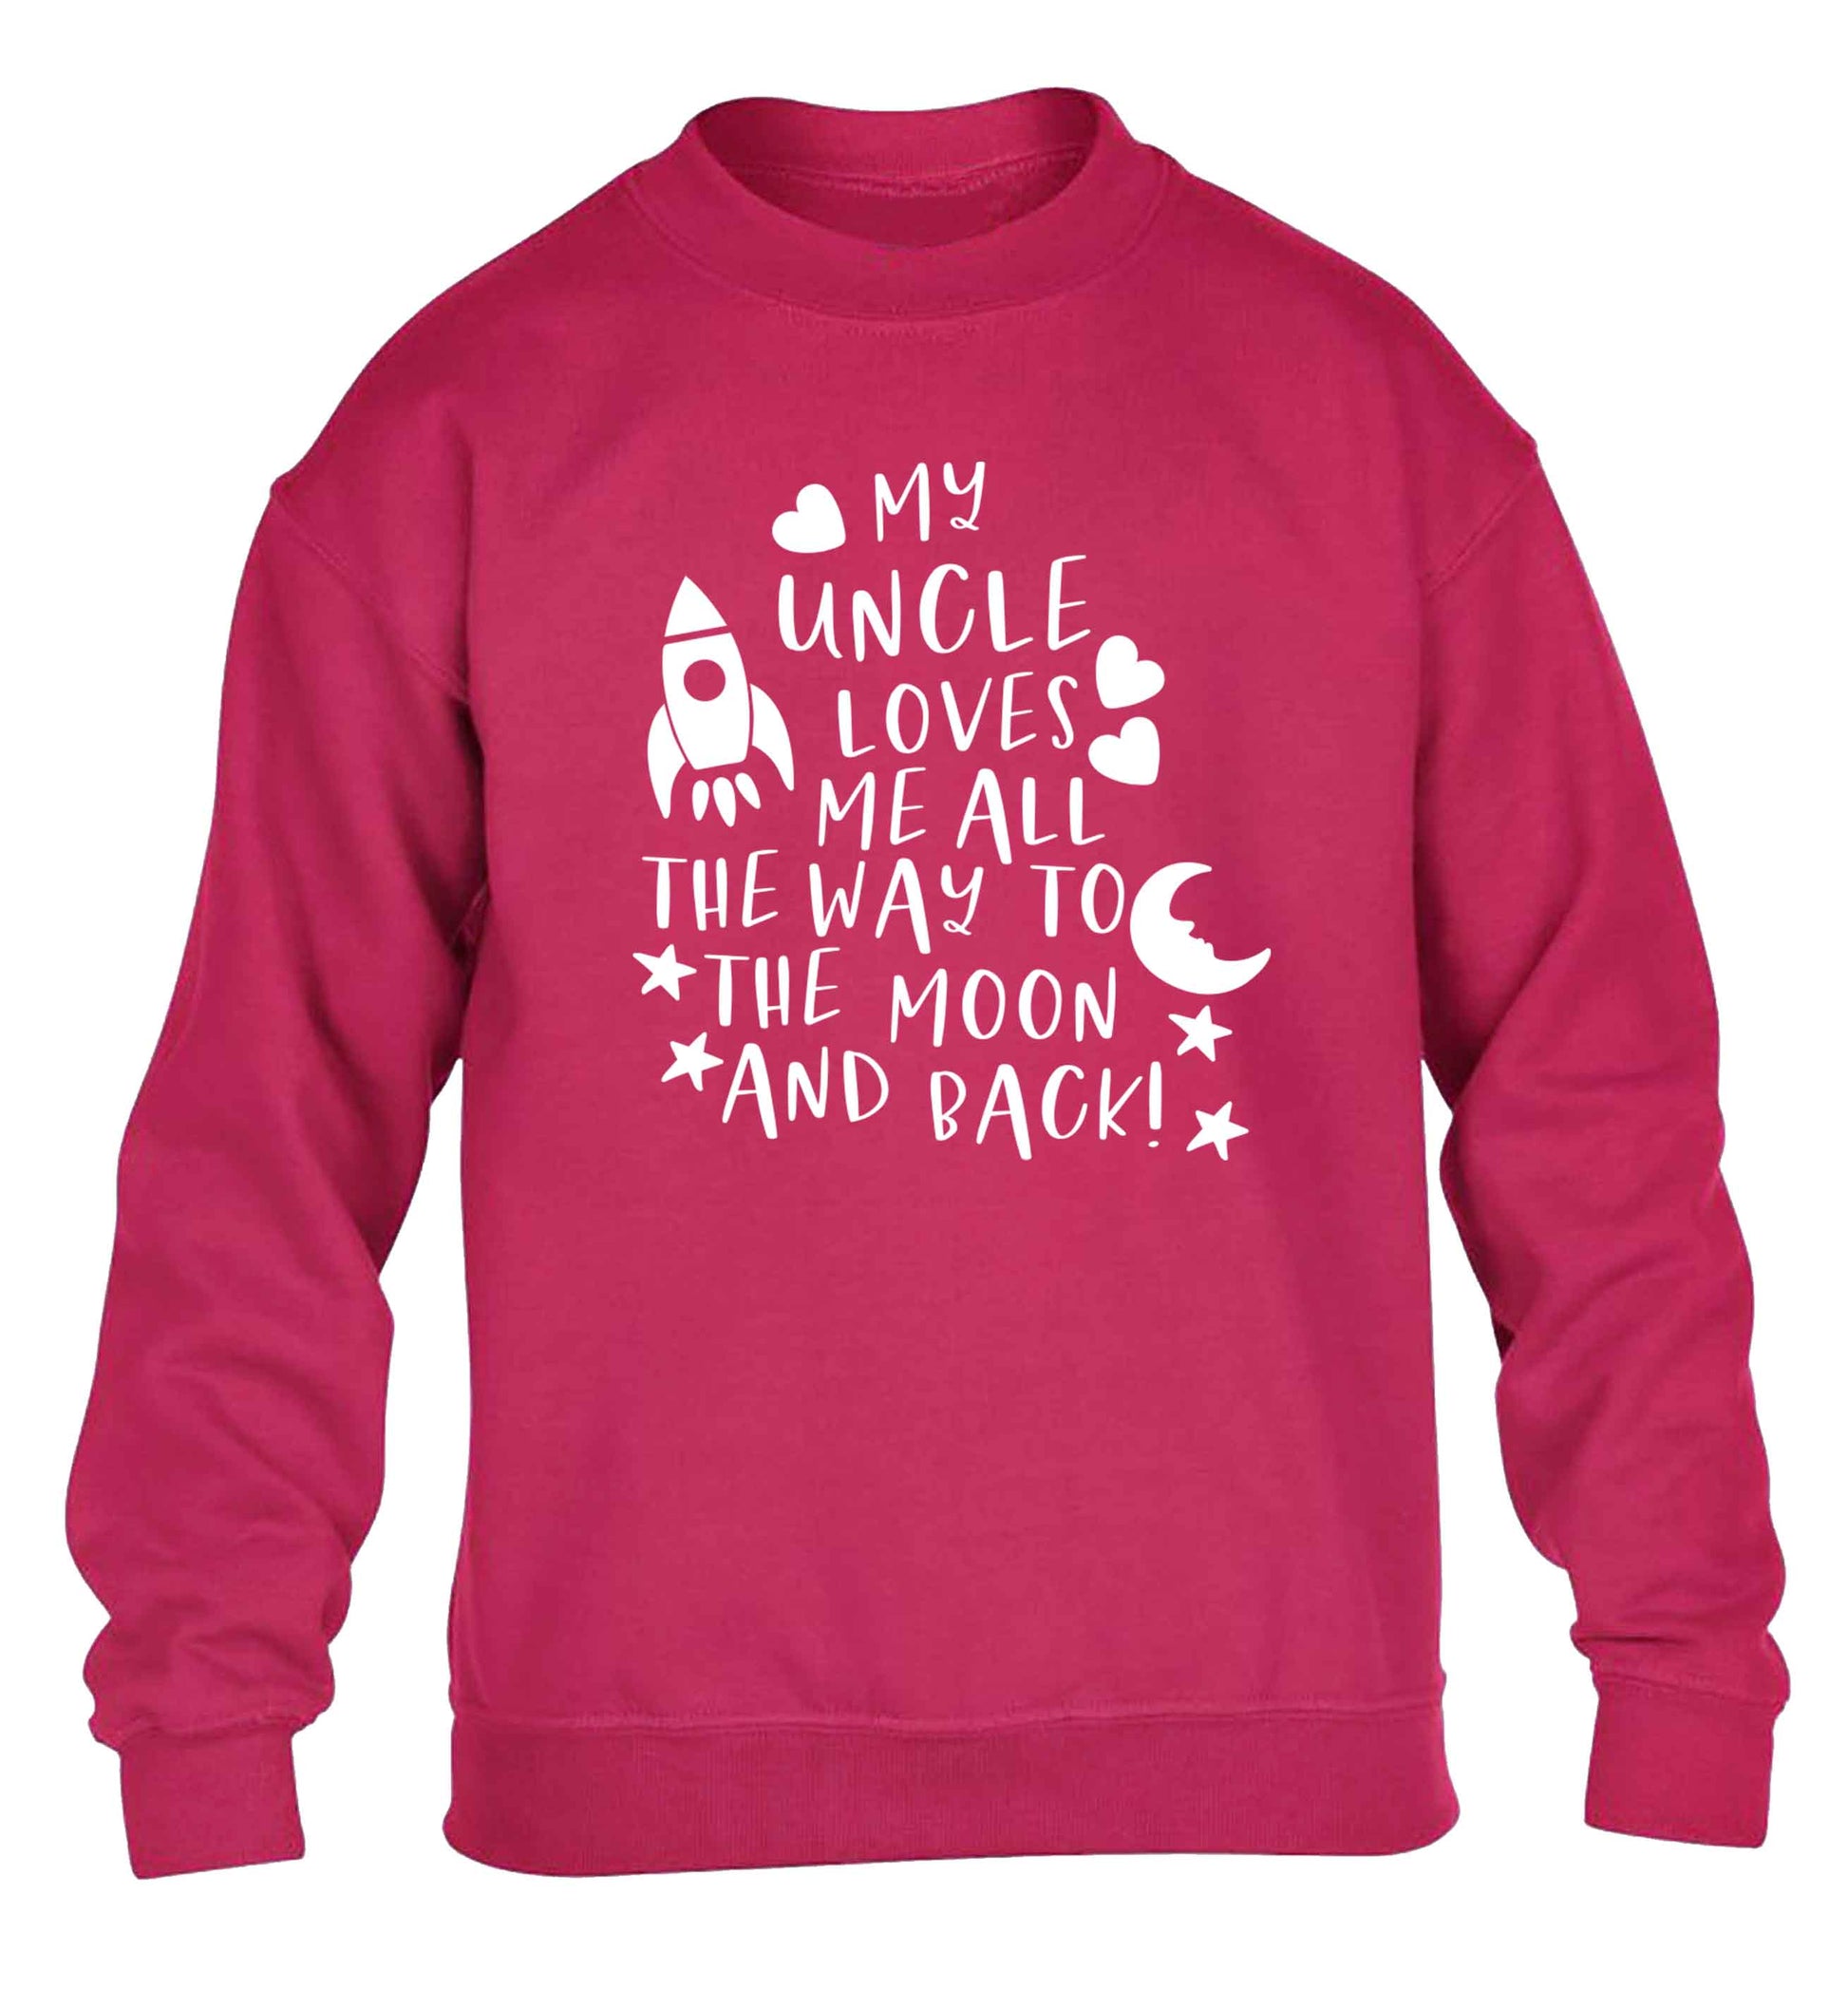 My uncle loves me all the way to the moon and back children's pink sweater 12-13 Years